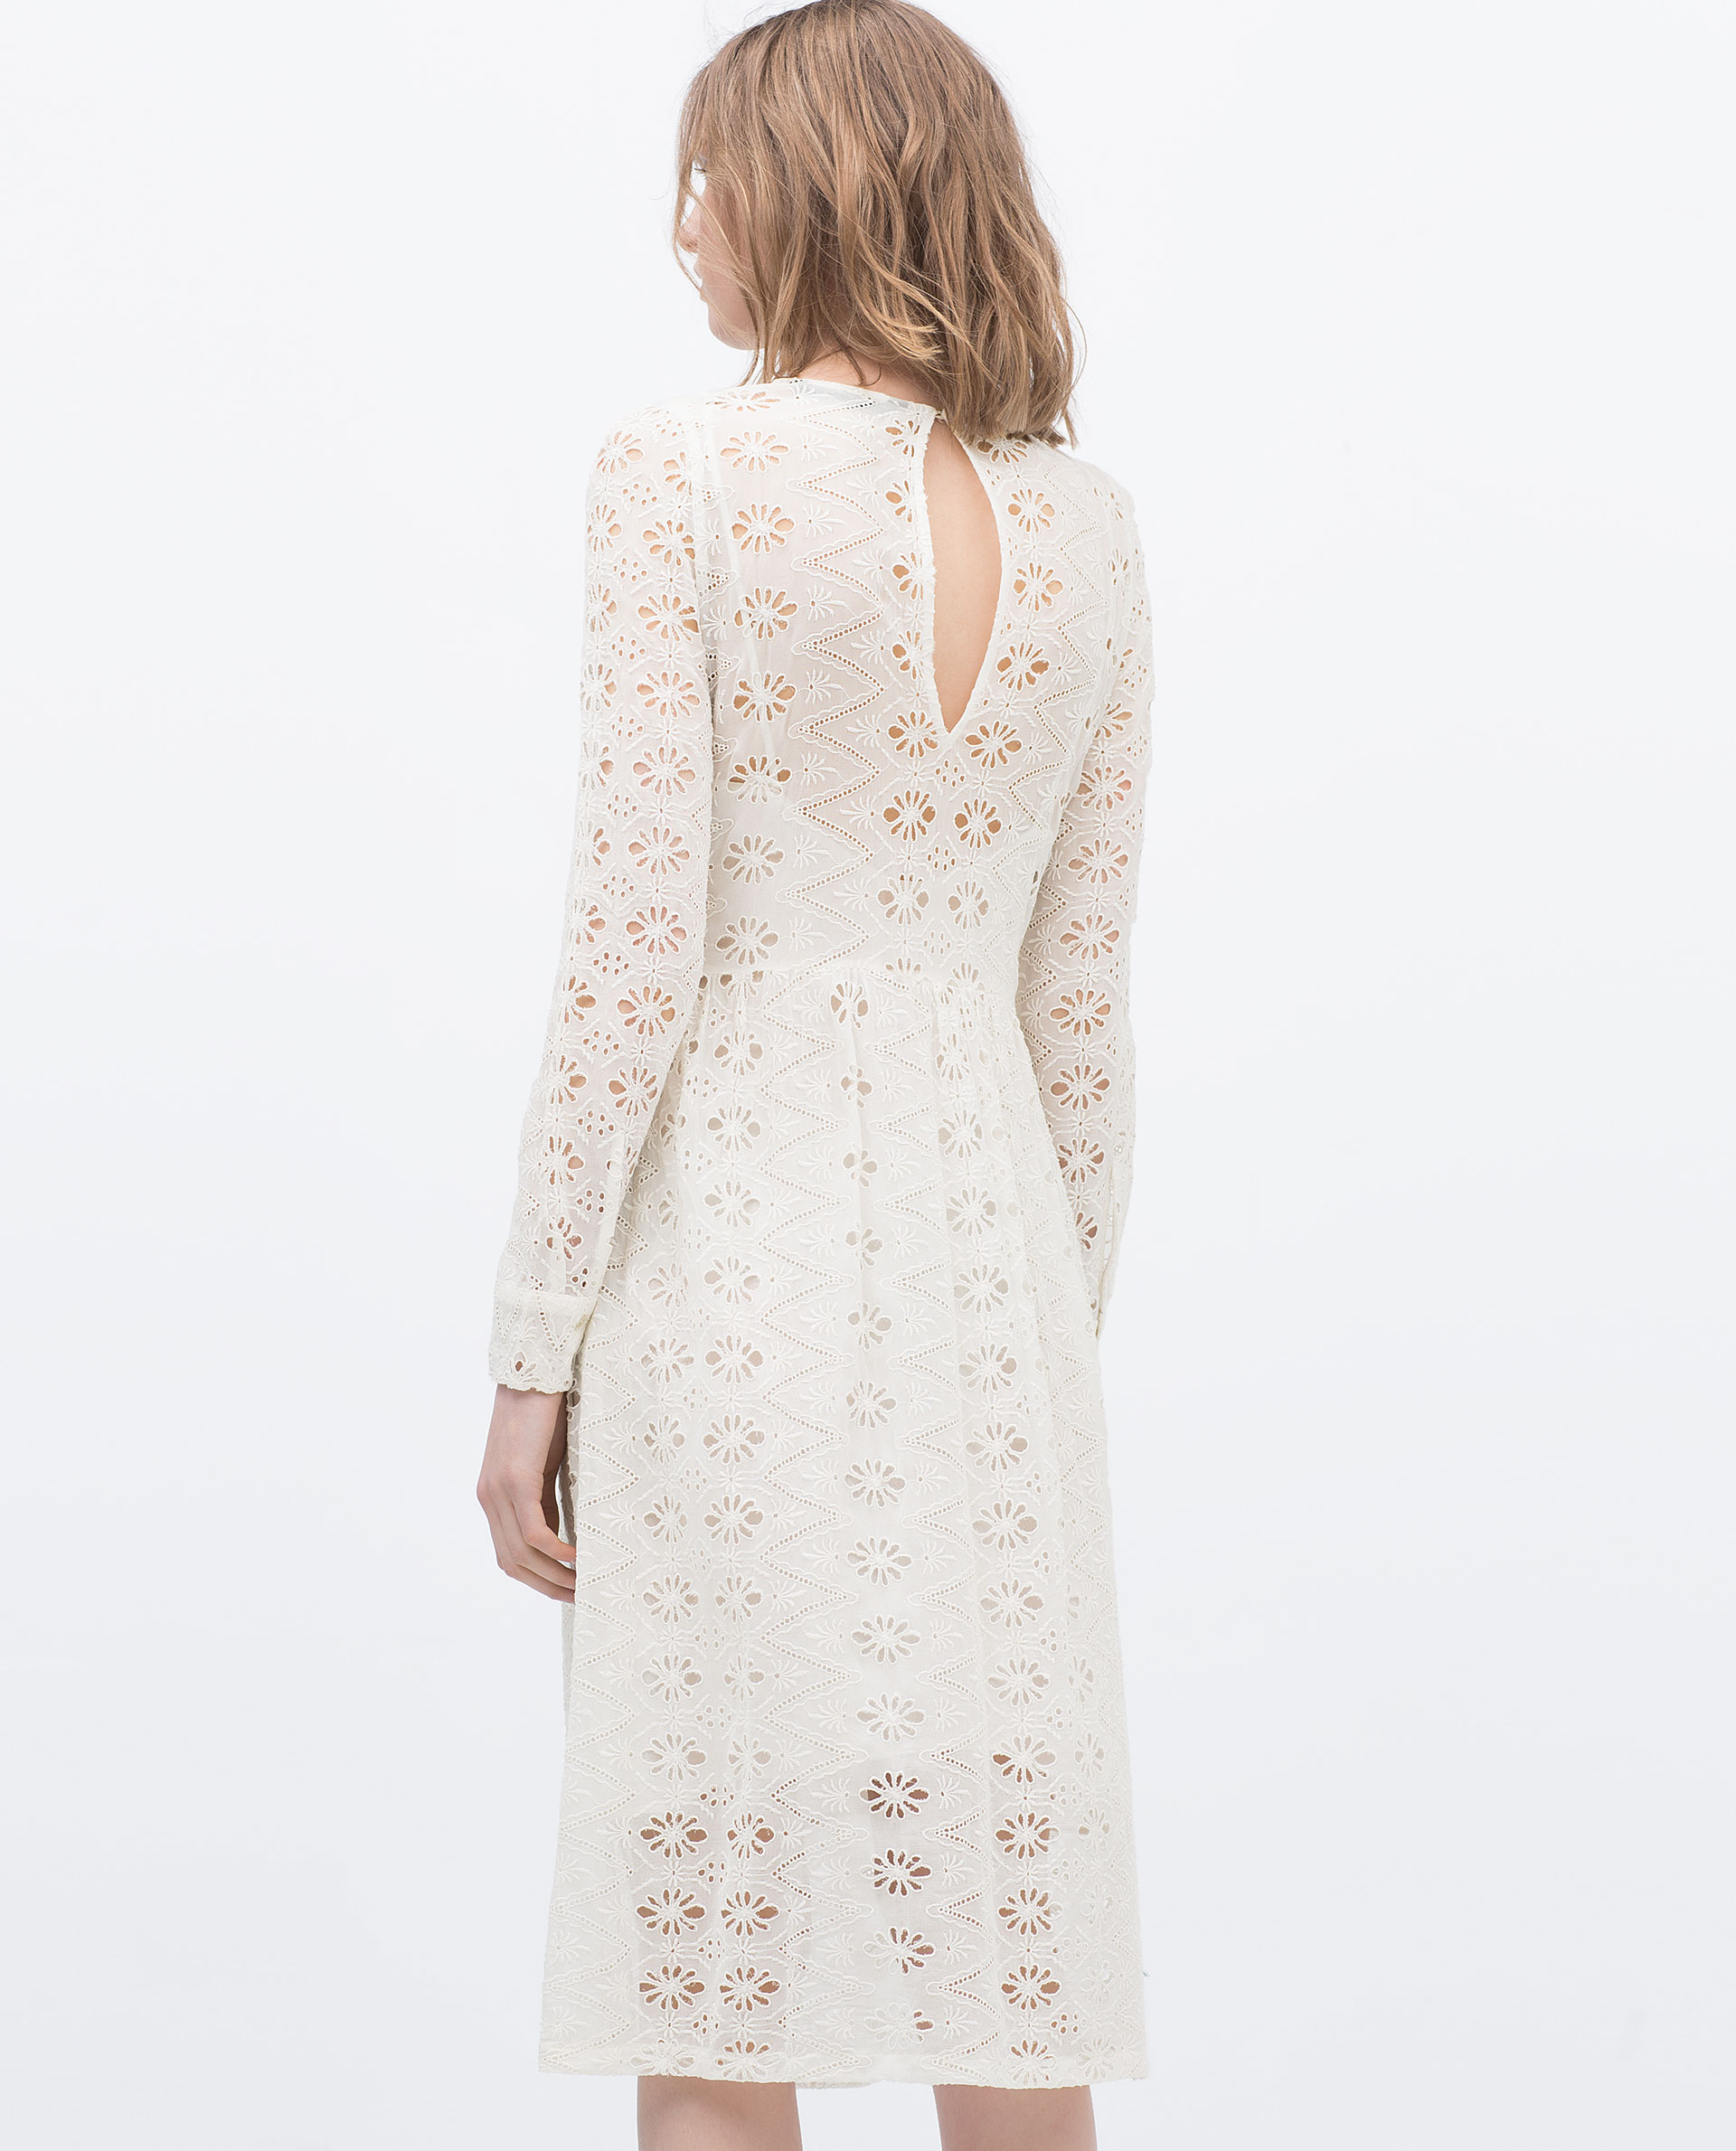 Zara Embroidered Dress With Full Skirt in White (Off-white) | Lyst